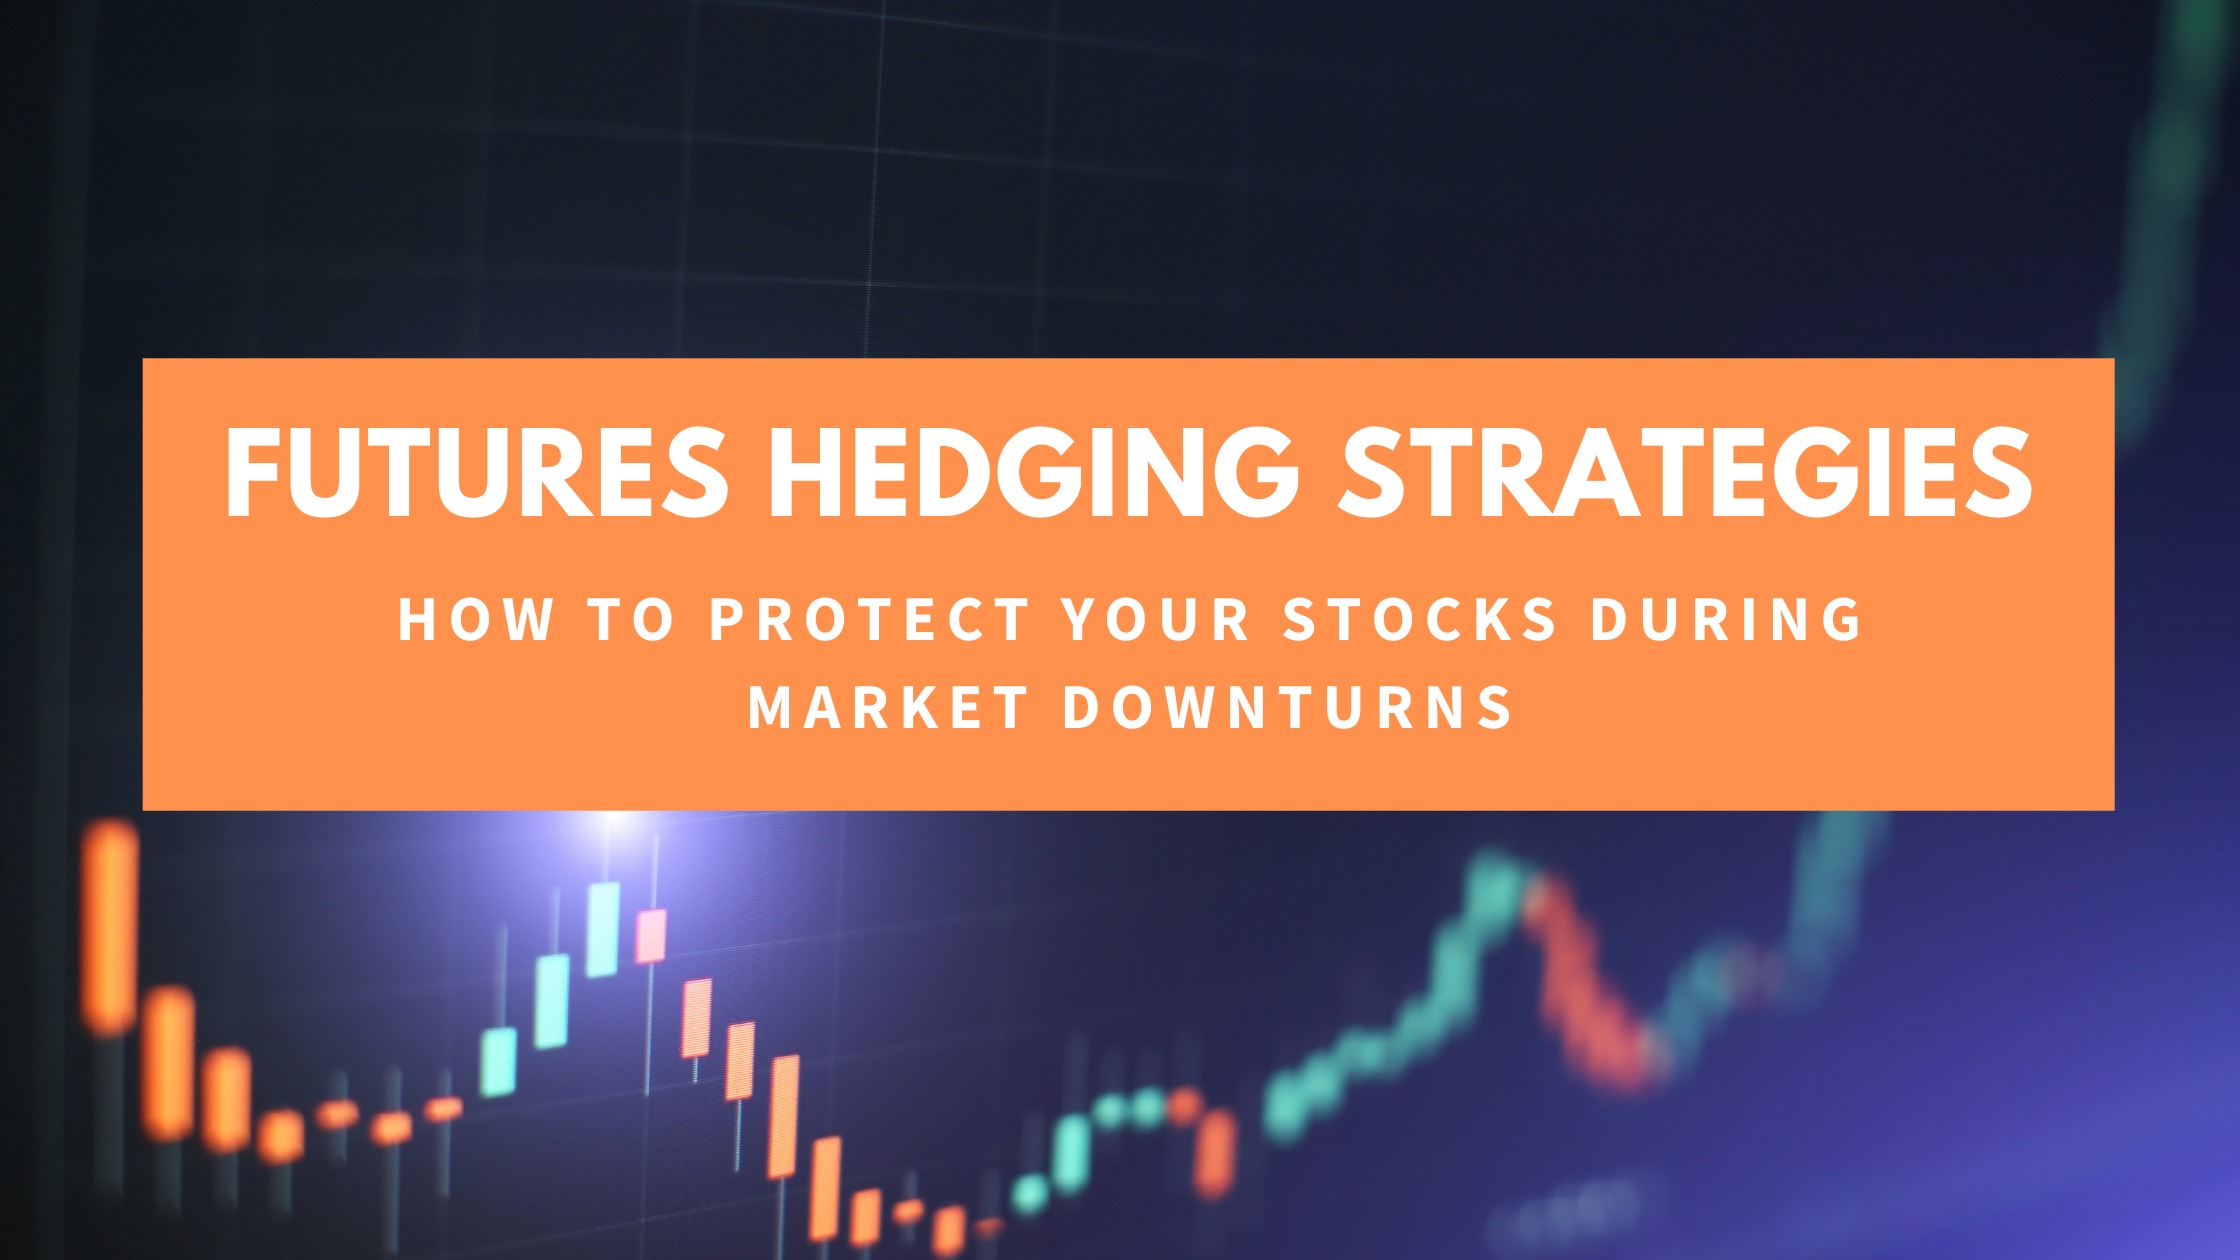 How Does Hedging Futures Work?